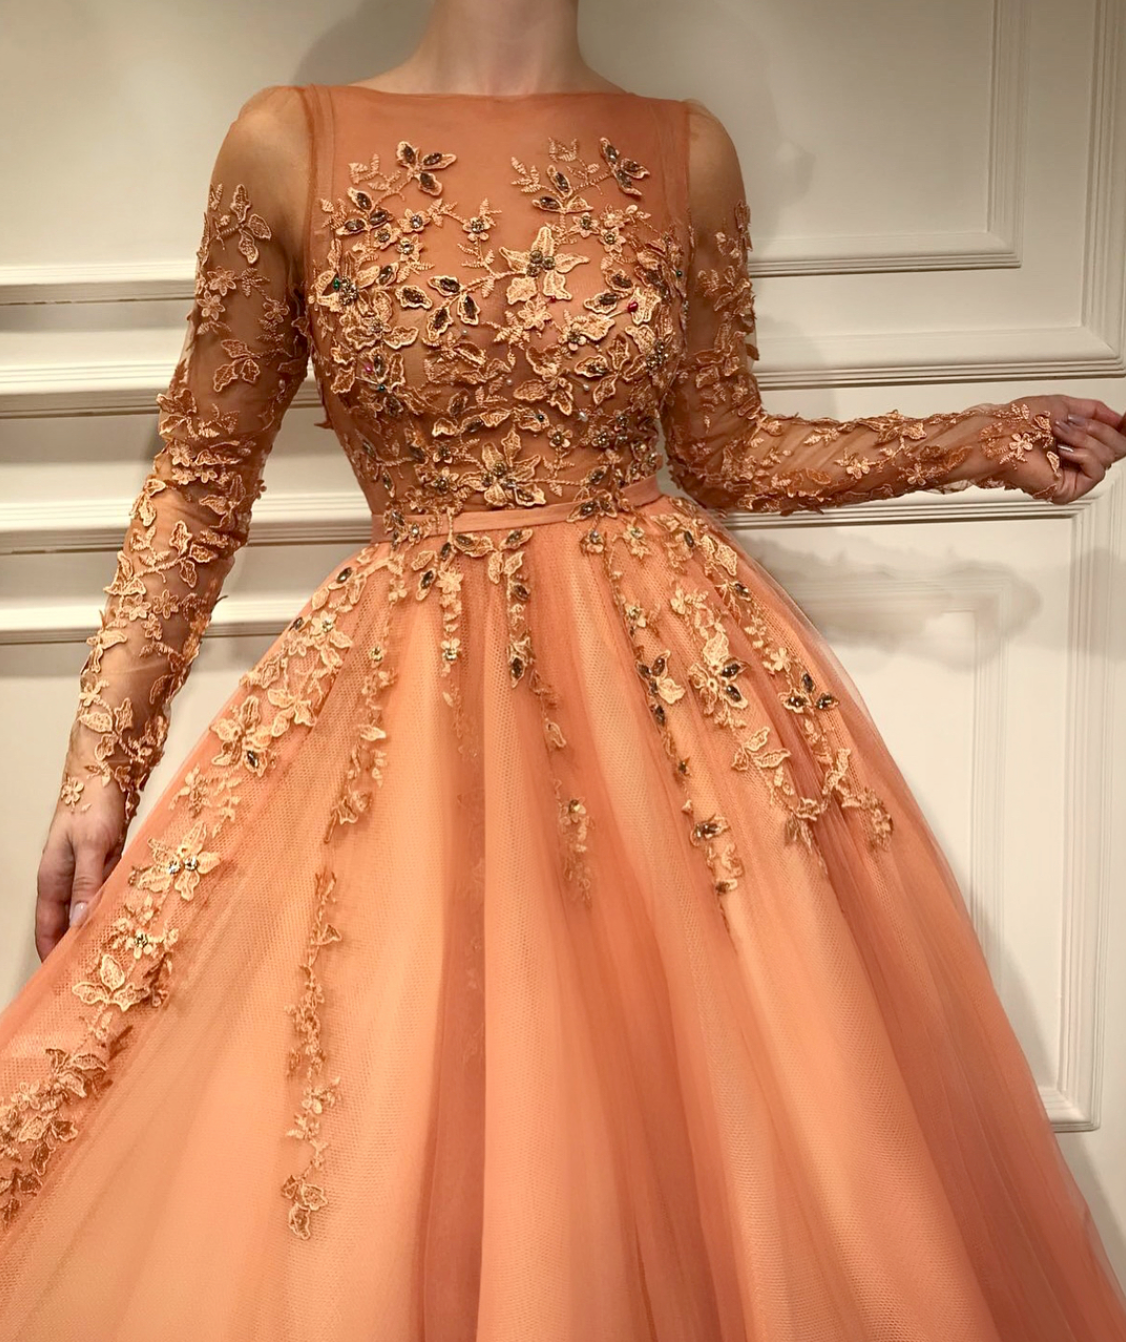 Peach A-Line dress with long sleeves and embroidery